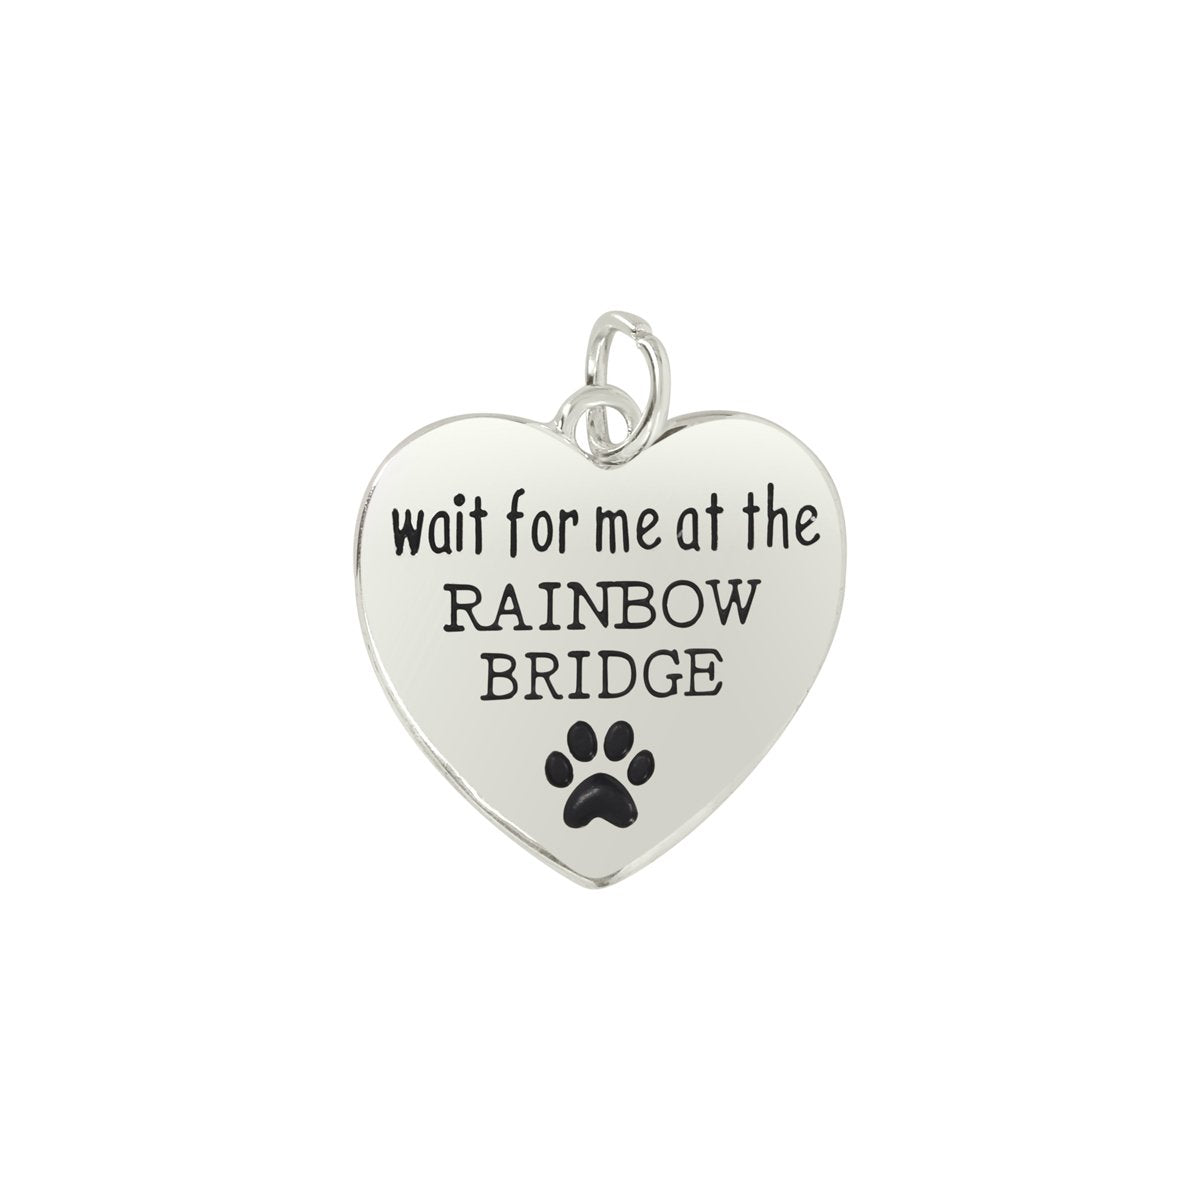 Wait For Me At The Rainbow Bridge Animal Paw Print Charms - Fundraising For A Cause